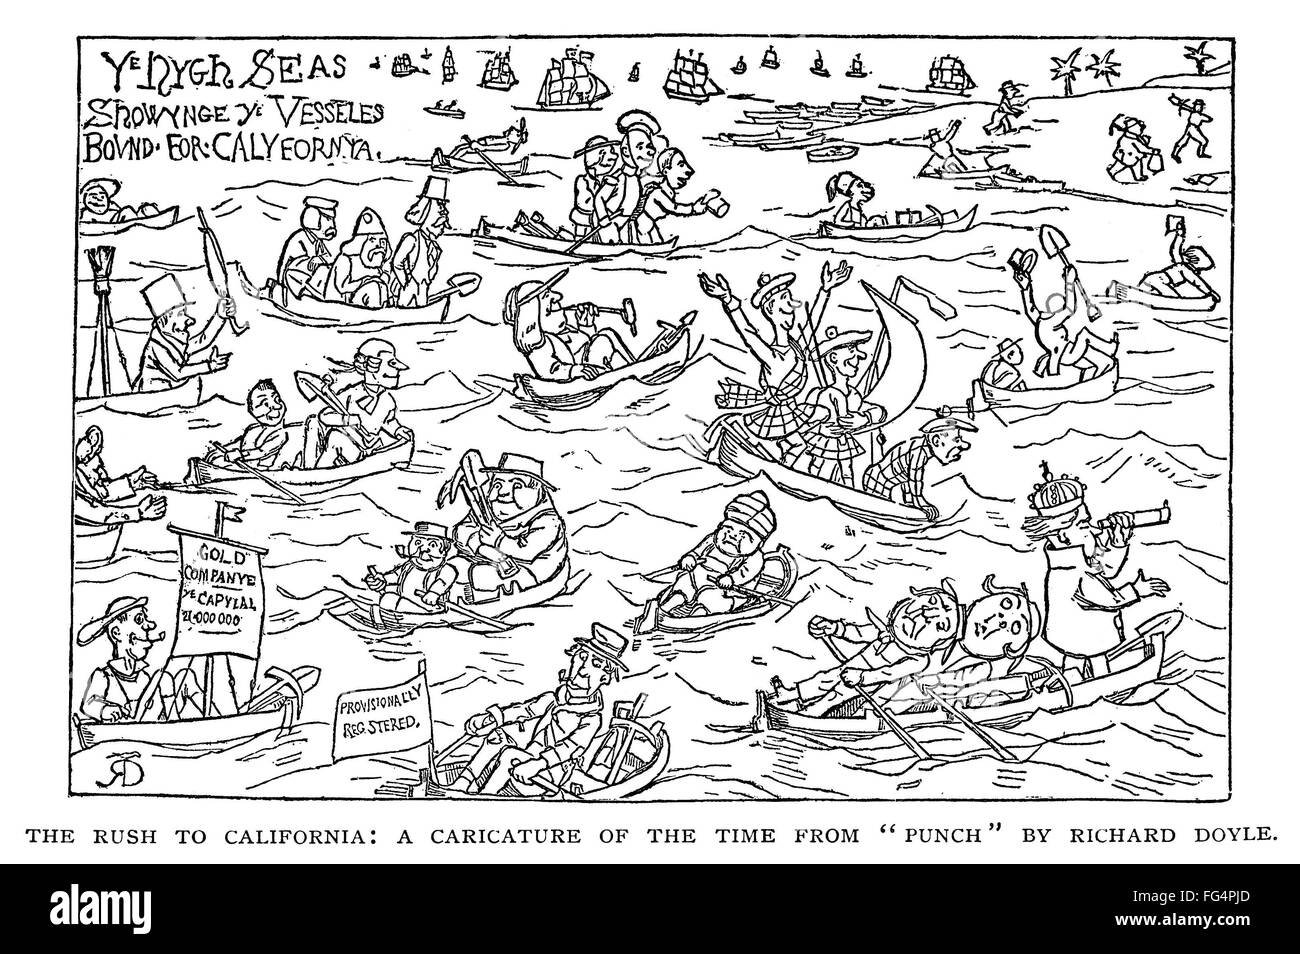 GOLD RUSH: BRITISH CARTOON. /n'The Rush to California.' Cartoon from 'Punch,' by Richard Doyle showing British men rowing across the ocean, bound for California, c1849. Stock Photo